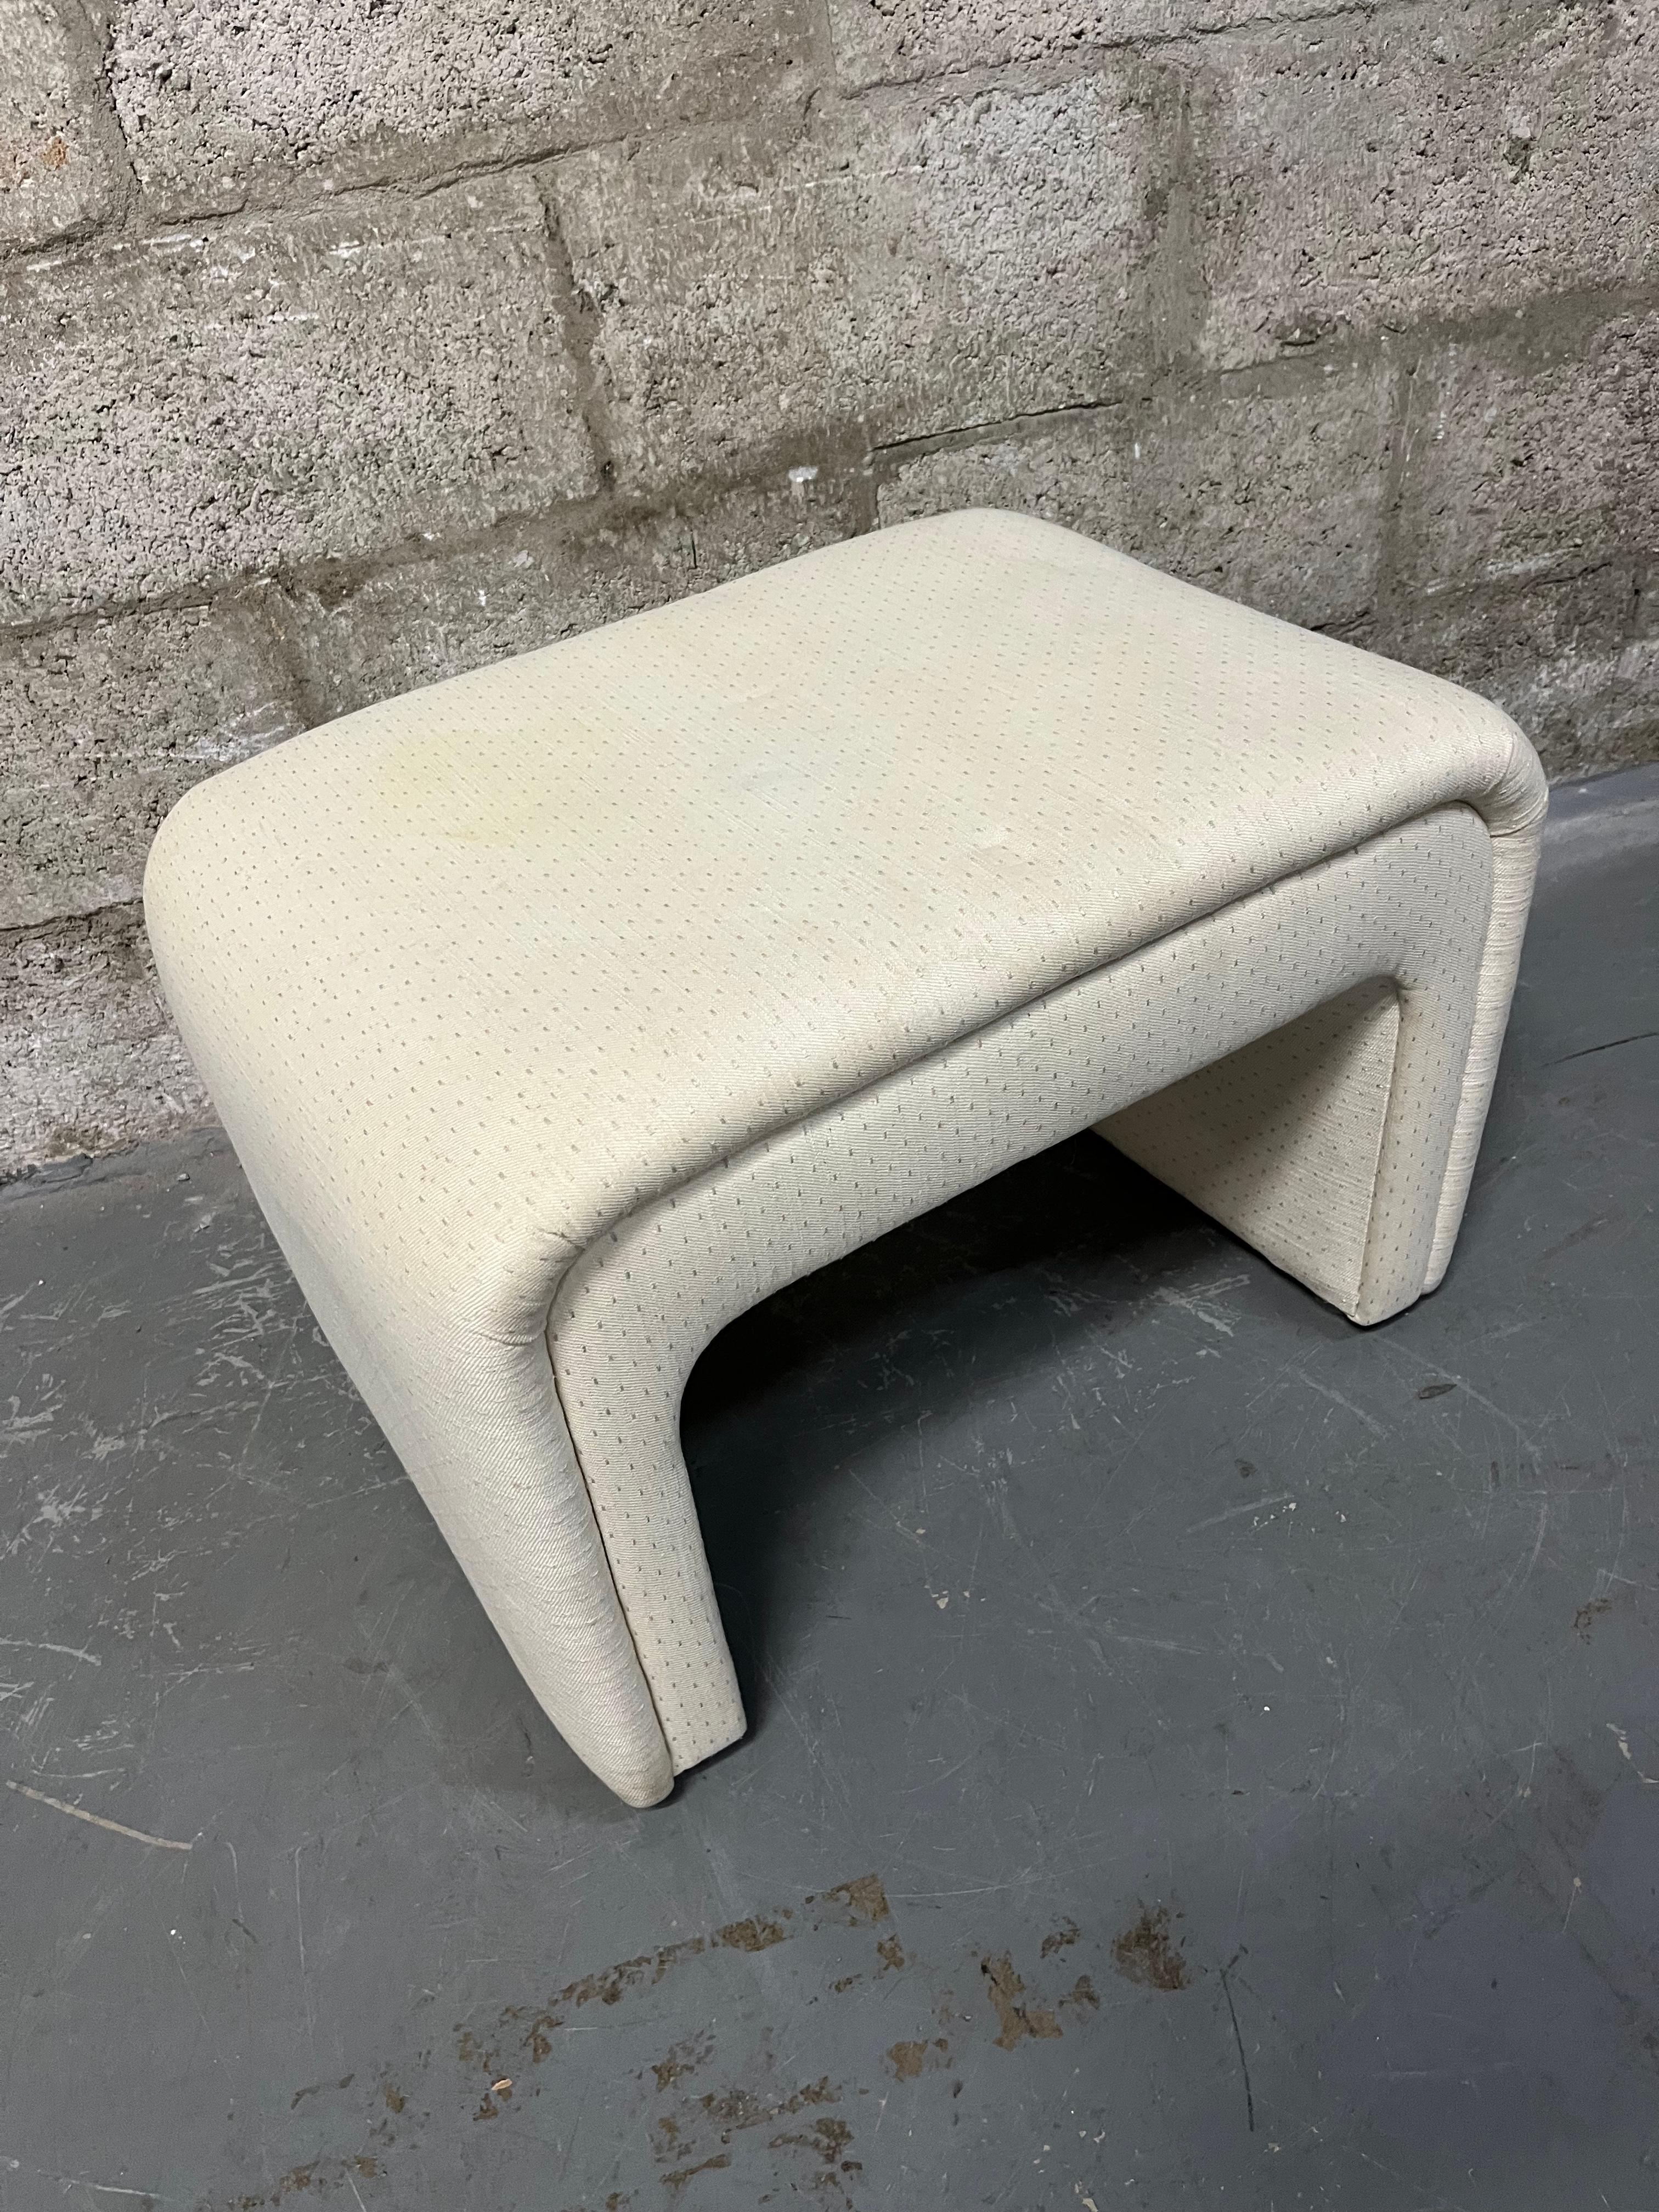 American Art Deco Revival Upholstered Waterfall Bench by Thayer Coggin. Circa 1980s  For Sale